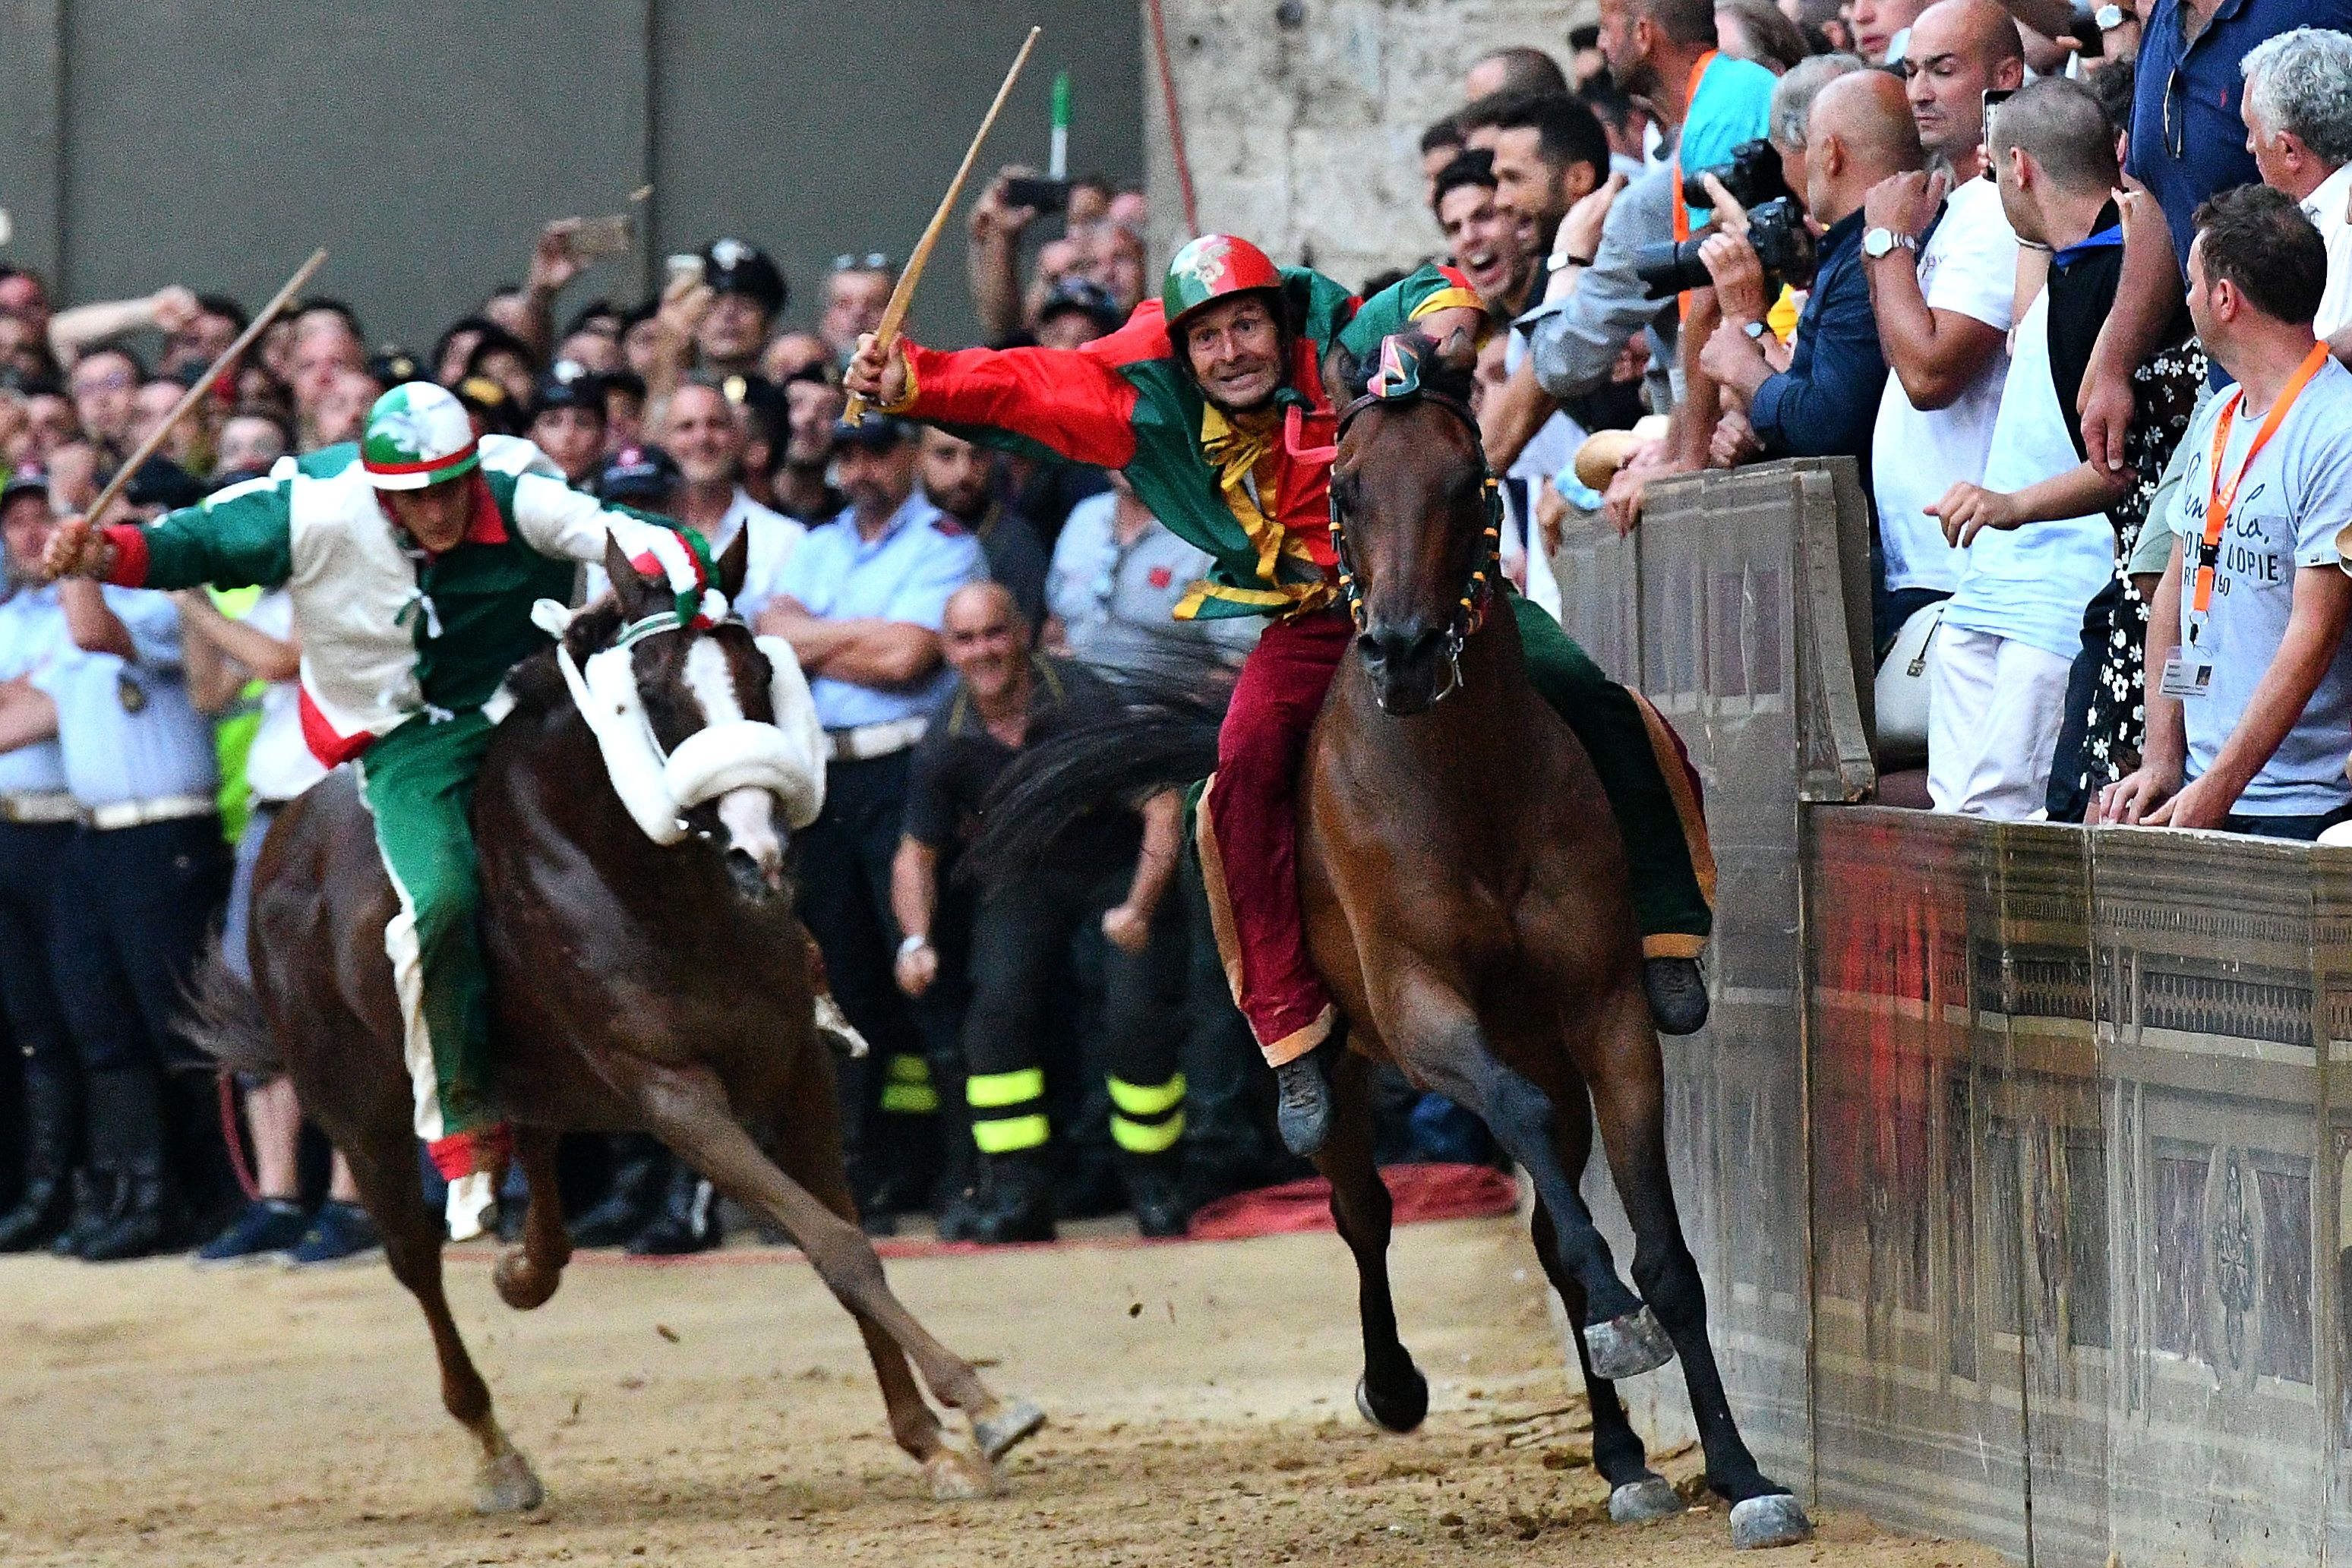 Jockey of the contrada "Drago" Andrea Mari (R) competes with his horse Rocco Nice and wins the historical Italian horse race Palio di Siena on July 2, 2018, in Siena. / AFP PHOTO / Vincenzo PINTO